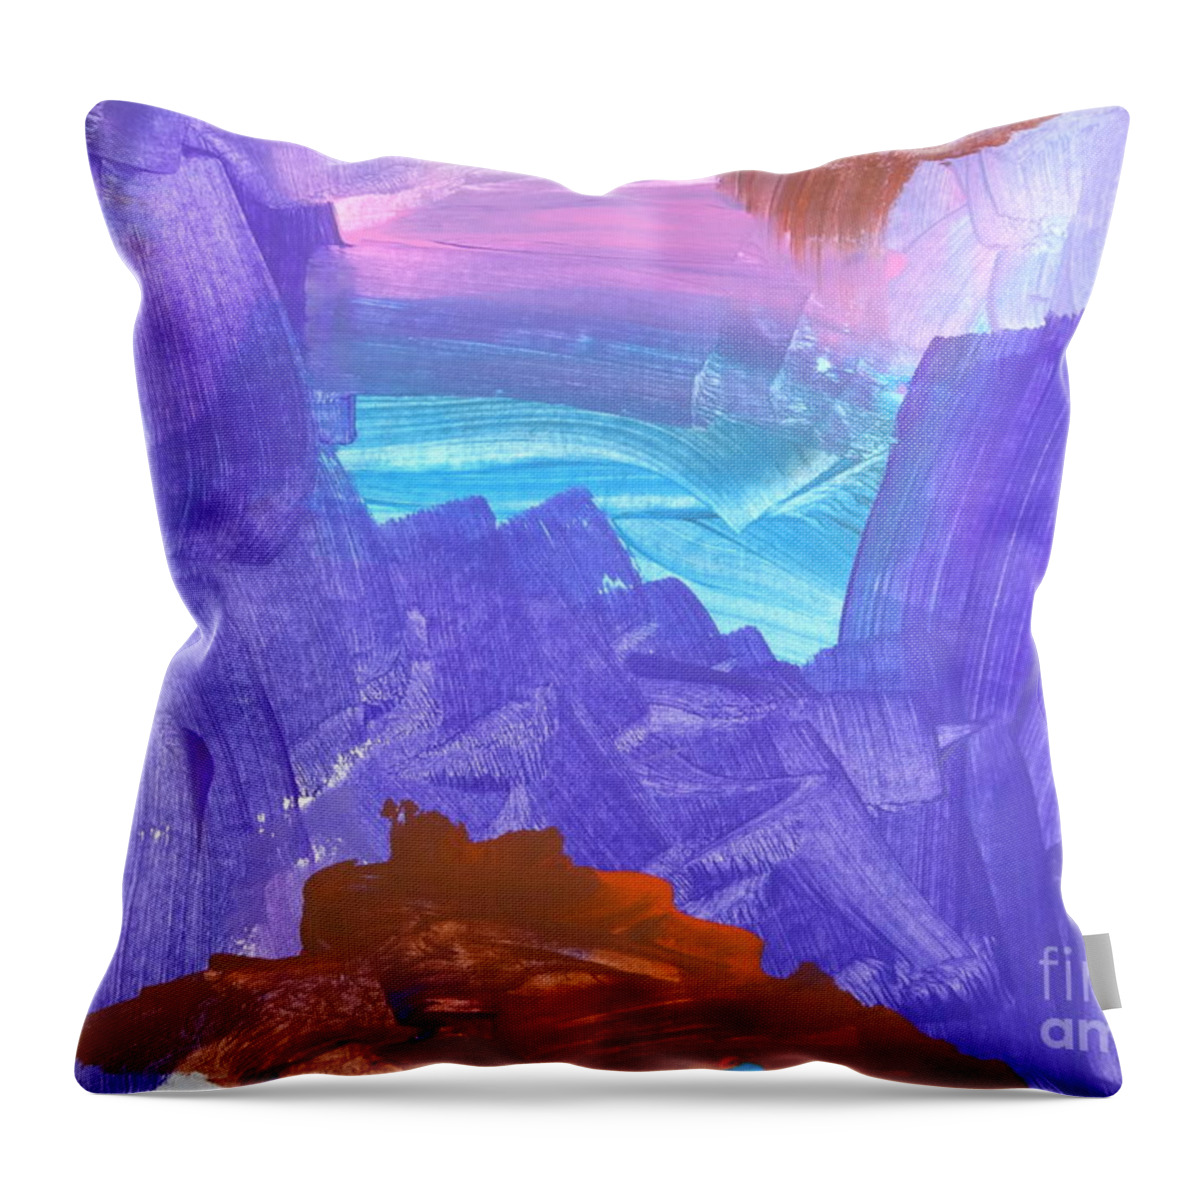 Original Throw Pillow featuring the photograph Surf by Hannah by Fred Wilson